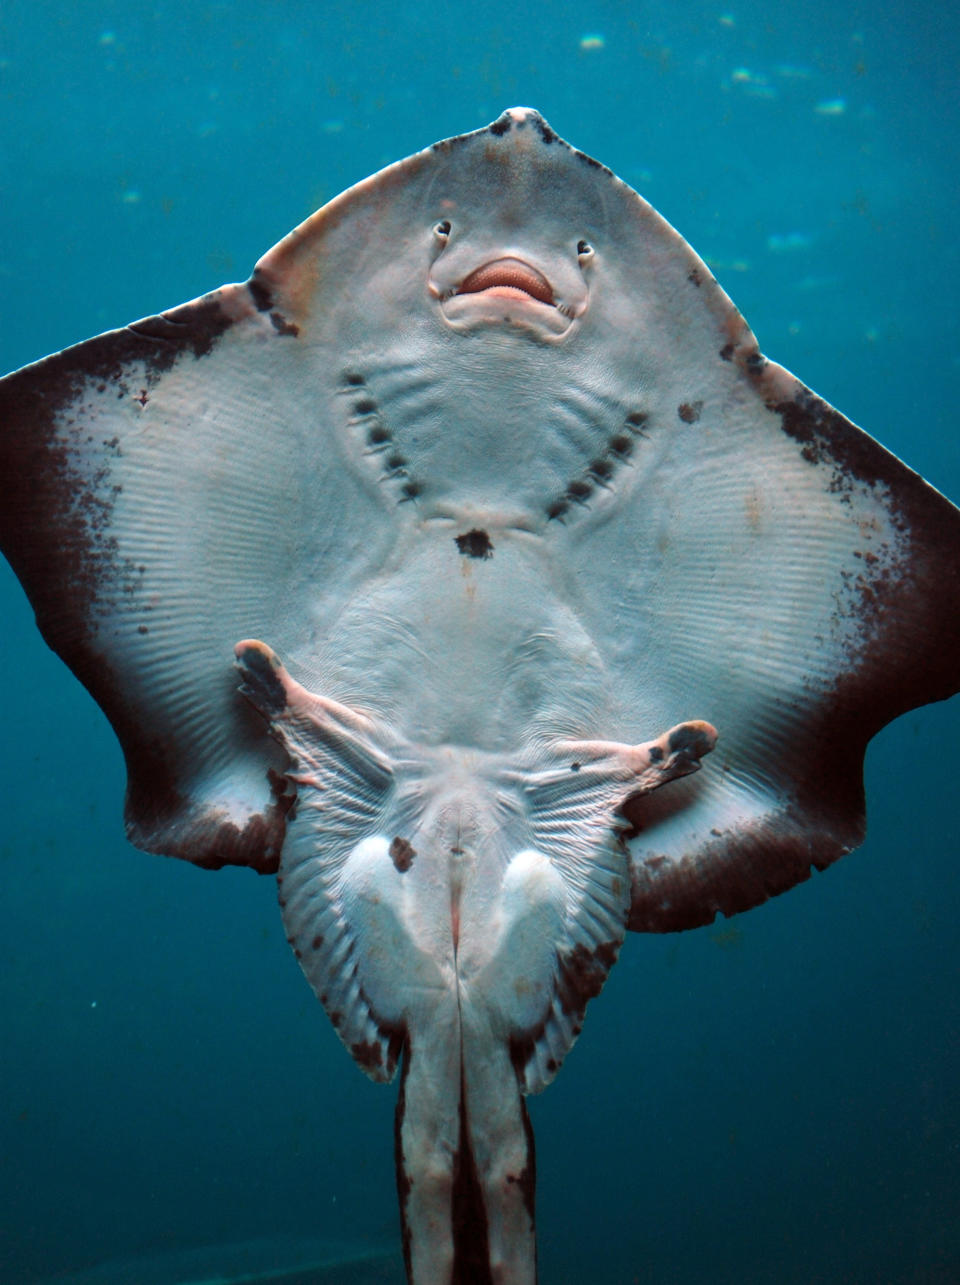 A close-up underwater shot of a stingray, seen from below, showing its unique, smiling face and textured body